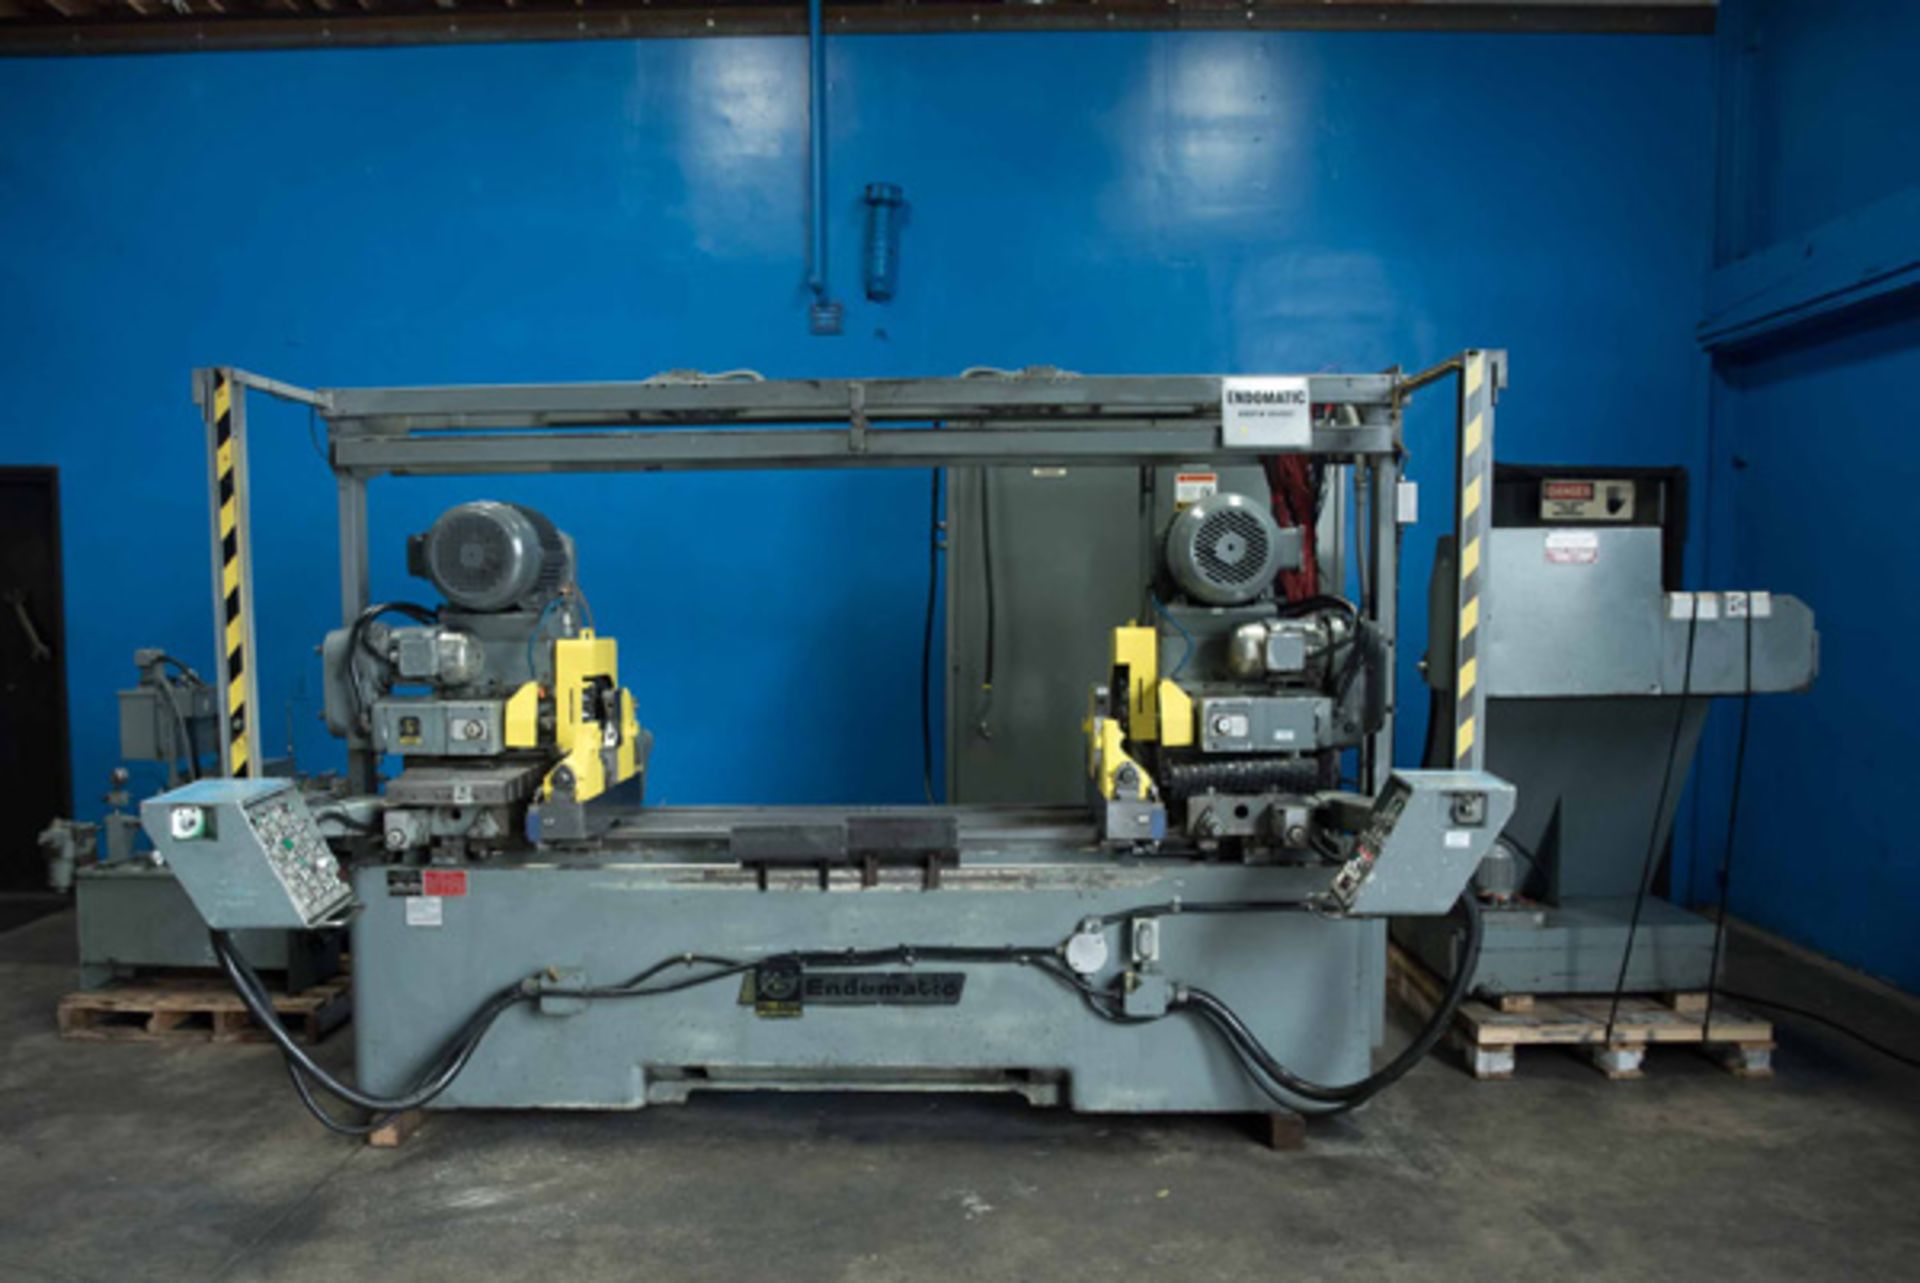 Giddings & Lewis Endomatic Double End, Milling Facing and Centering Machine | 8" x 24" - 66",